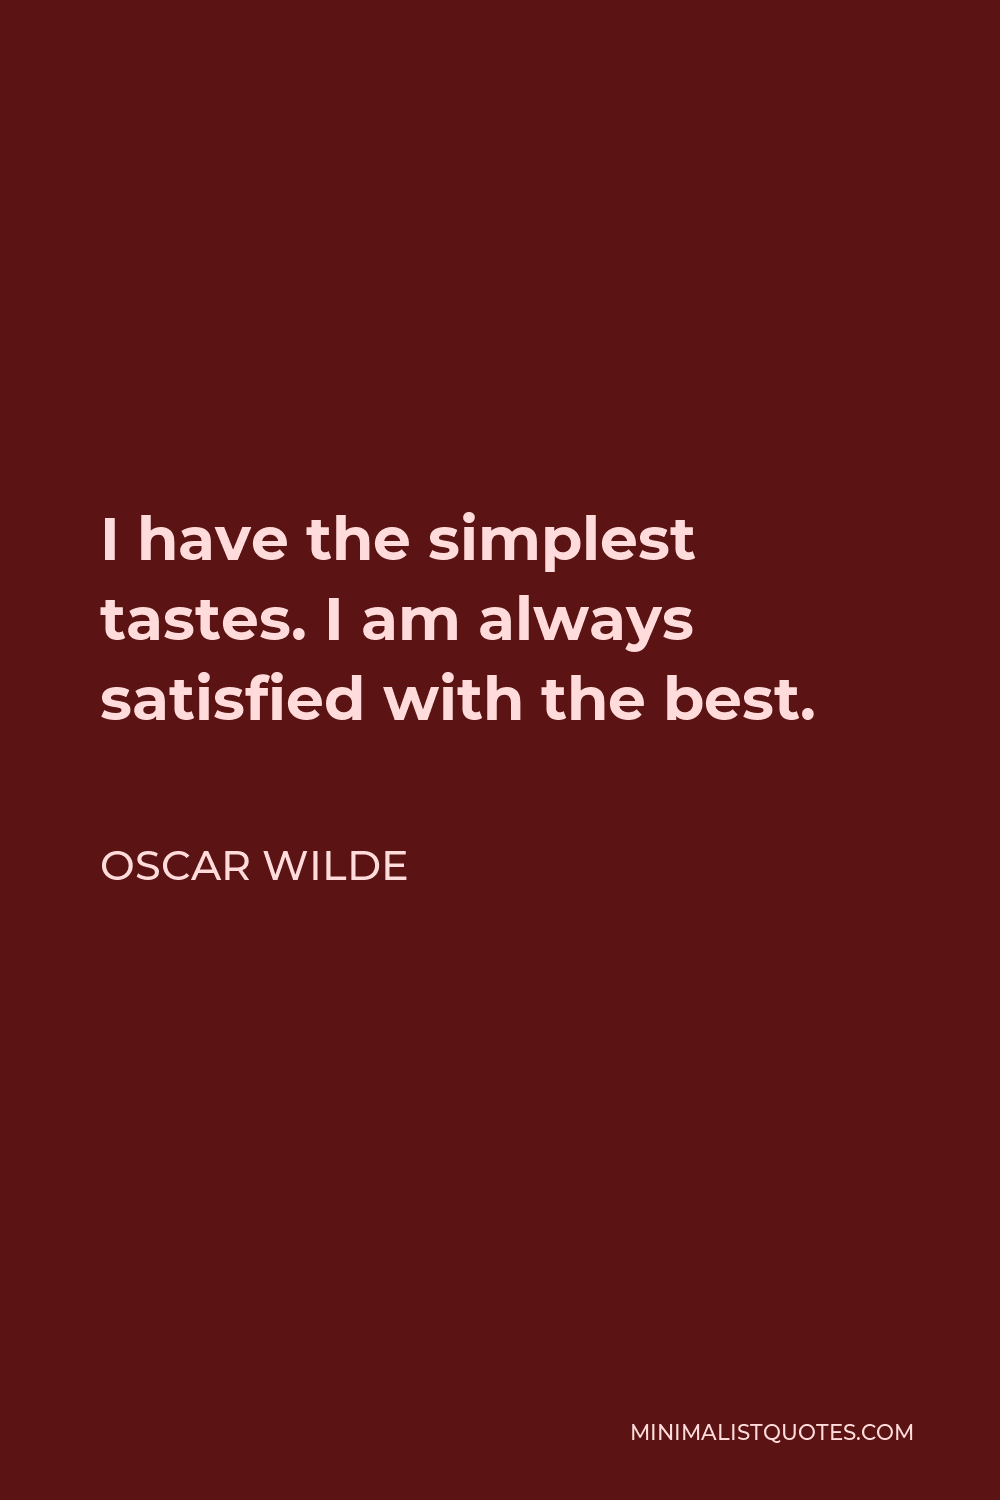 Oscar Wilde Quote - I have the simplest tastes. I am always satisfied with the best.